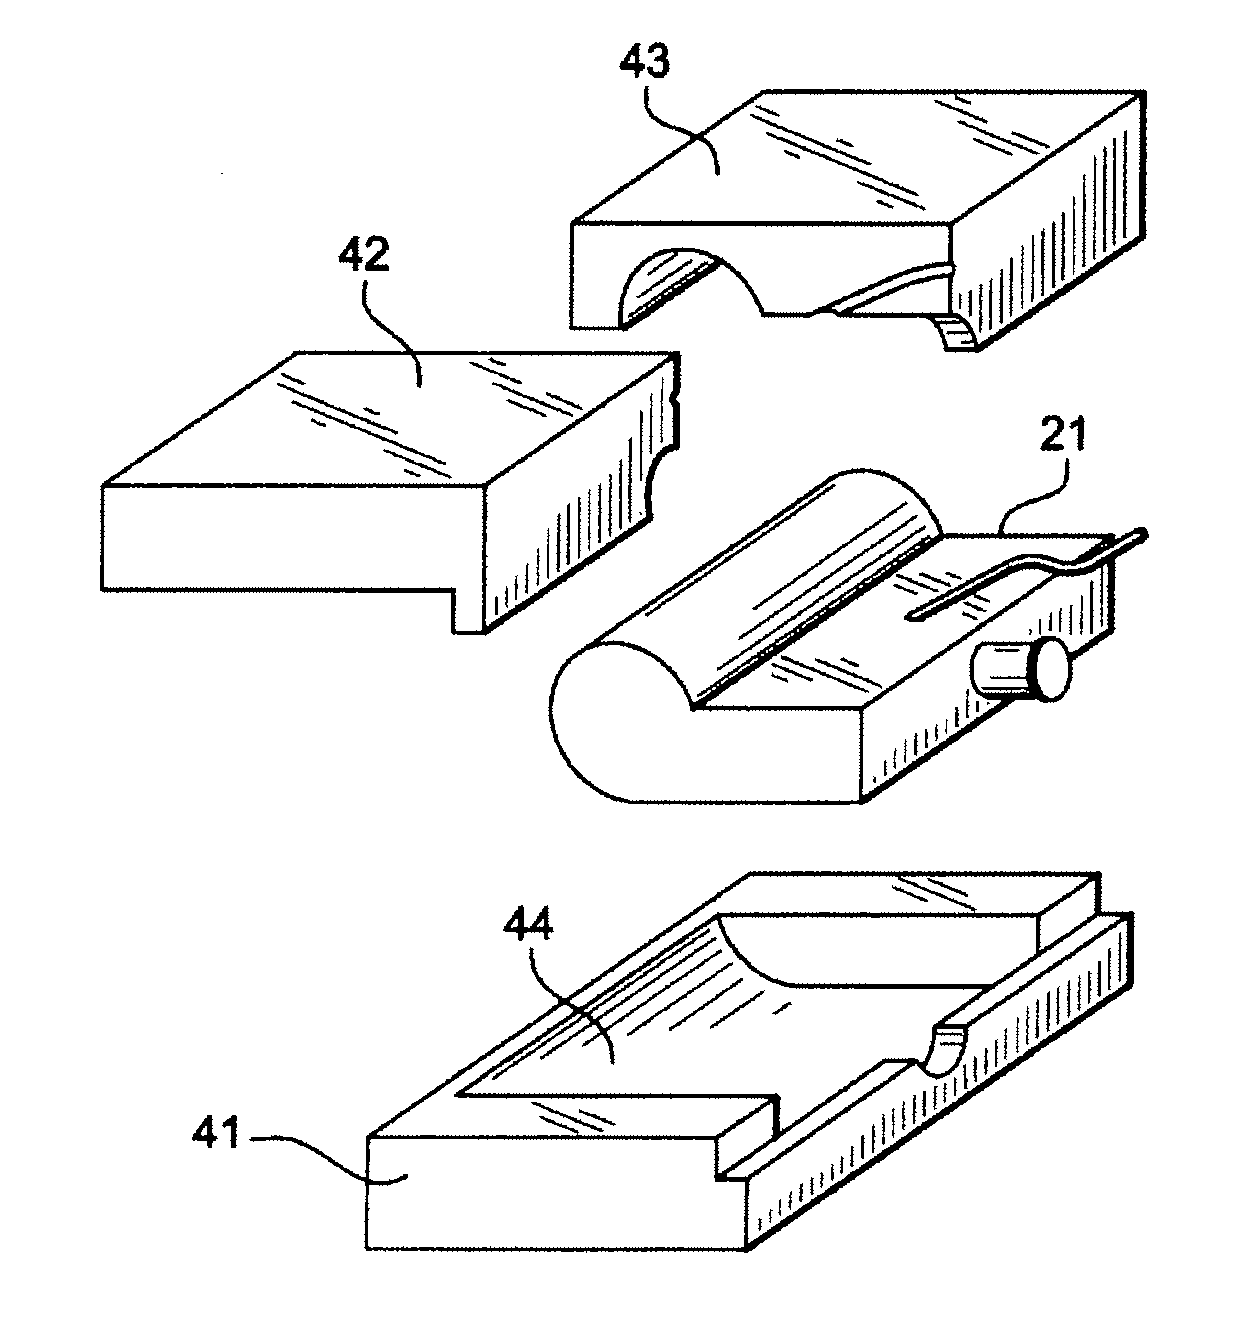 Method for producing structures of complex shapes of composite materials